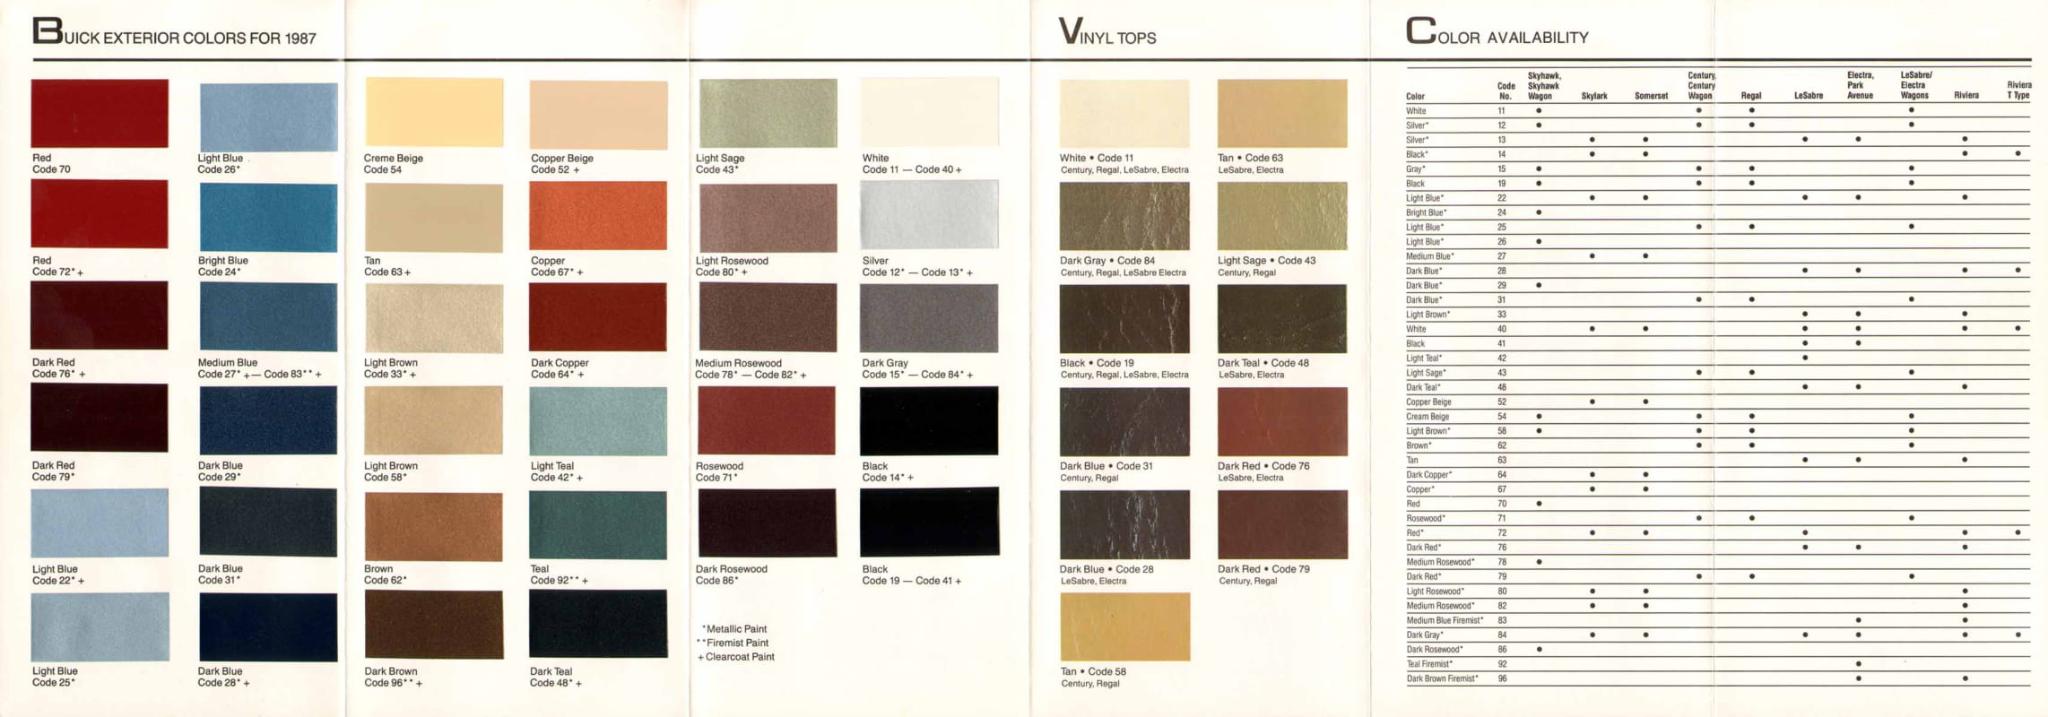 General Motors oem paint swatches, color codes and color names for 1987 vehicles.